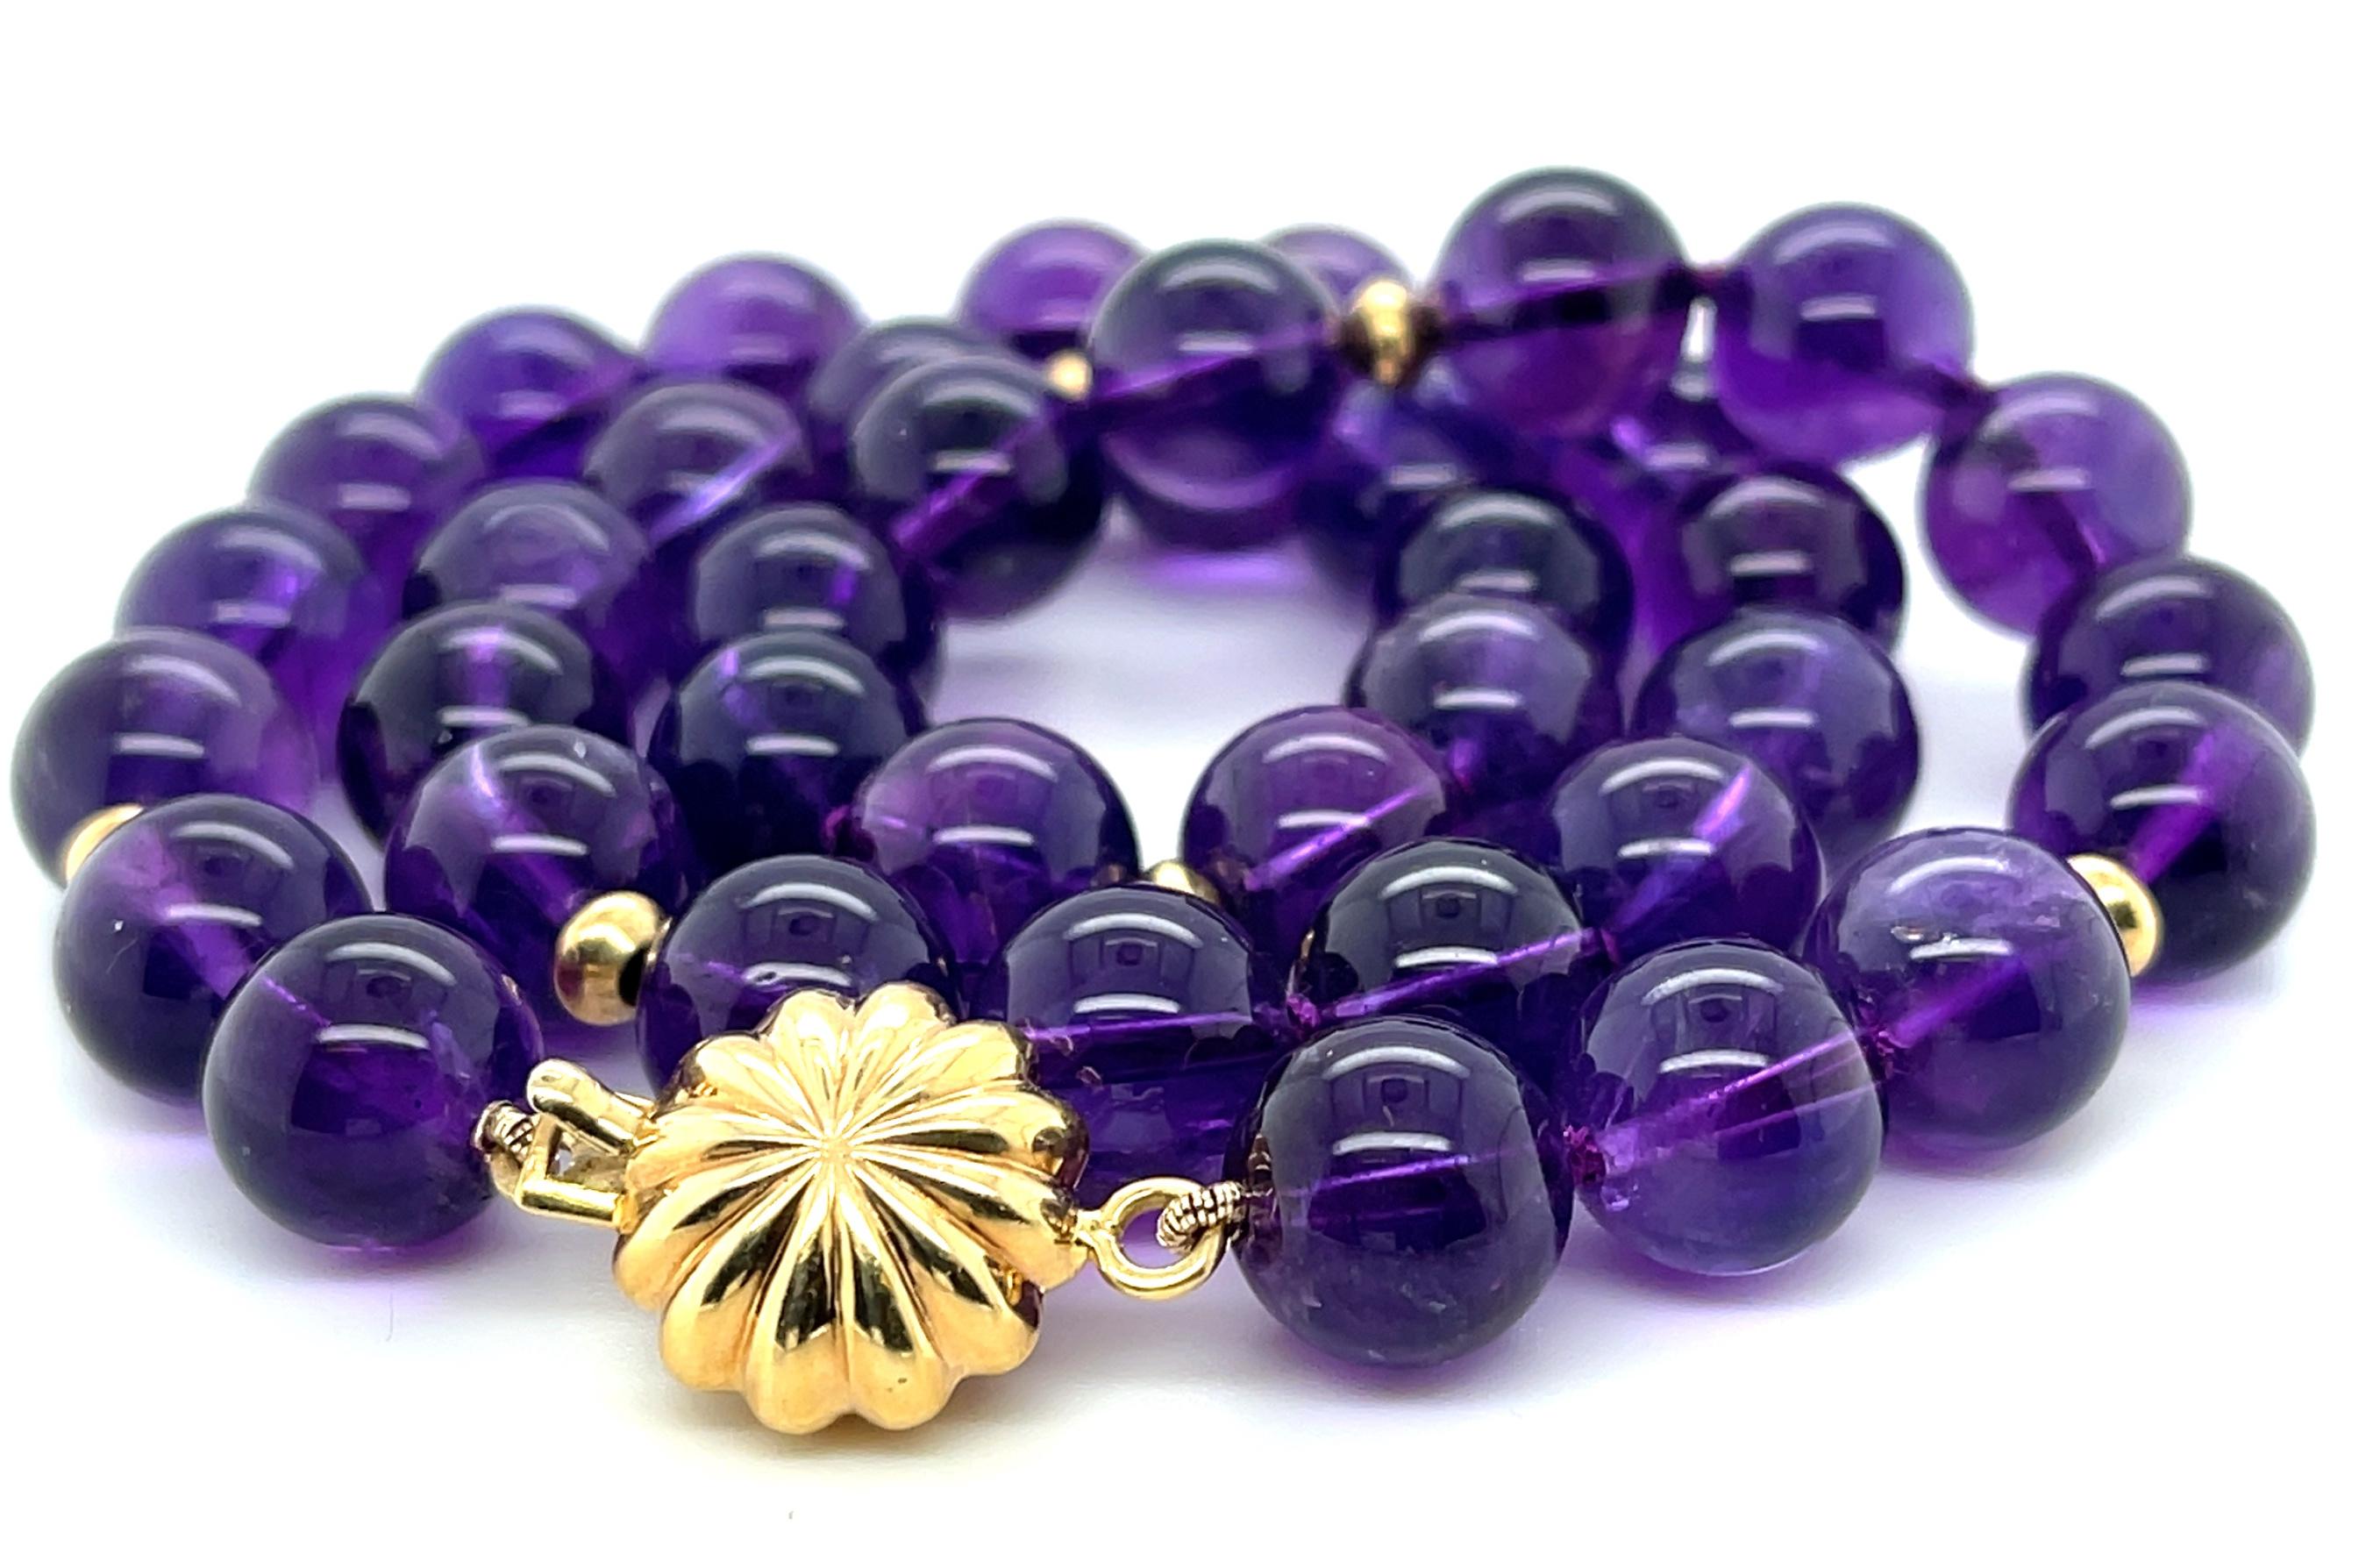 10mm Amethyst Bead Necklace with Yellow Gold Accents, 18 Inches  For Sale 2